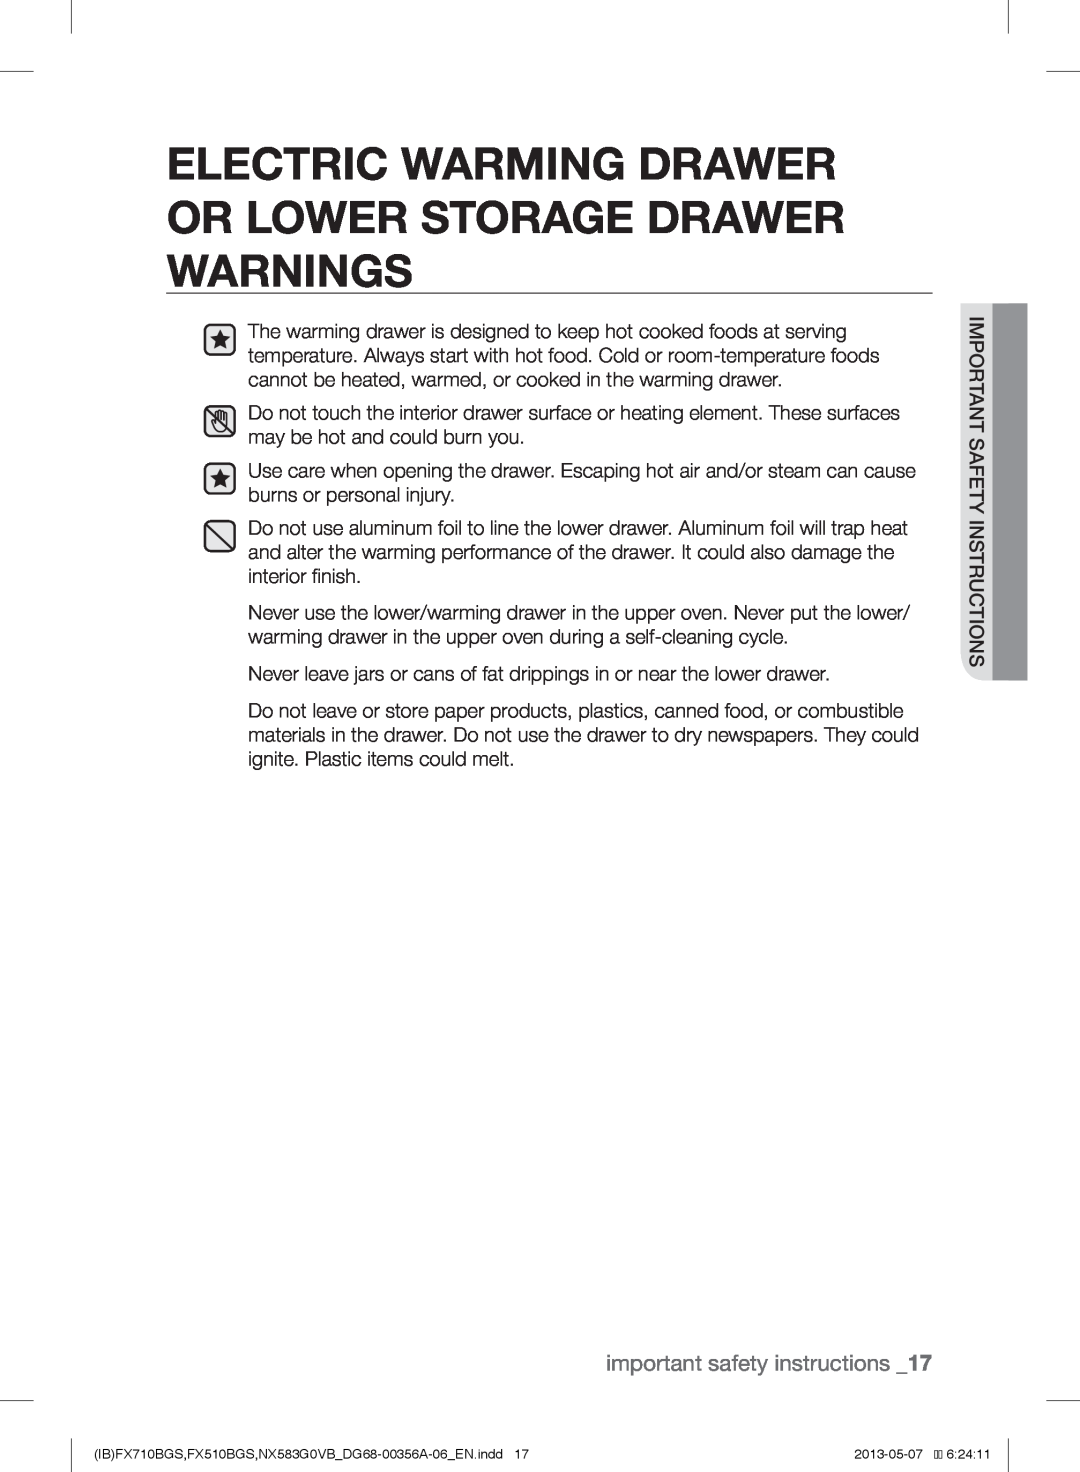 Samsung FX710BGS, NX583GOVBBB Electric Warming Drawer Or Lower Storage Drawer Warnings, important safety instructions 